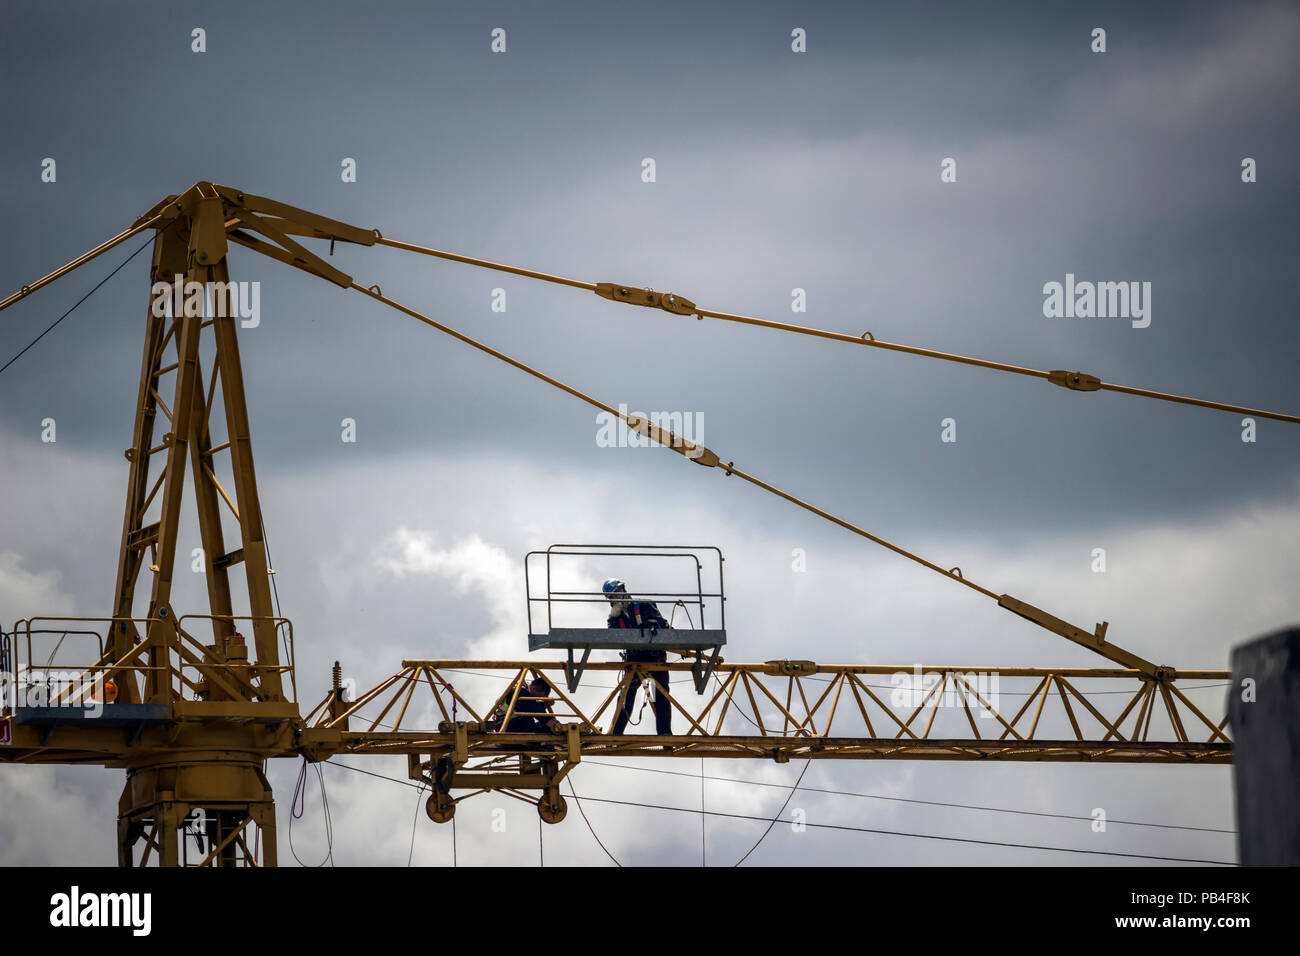 Belgrade, Serbia - Workers repairing a construction crane high above the ground Stock Photo